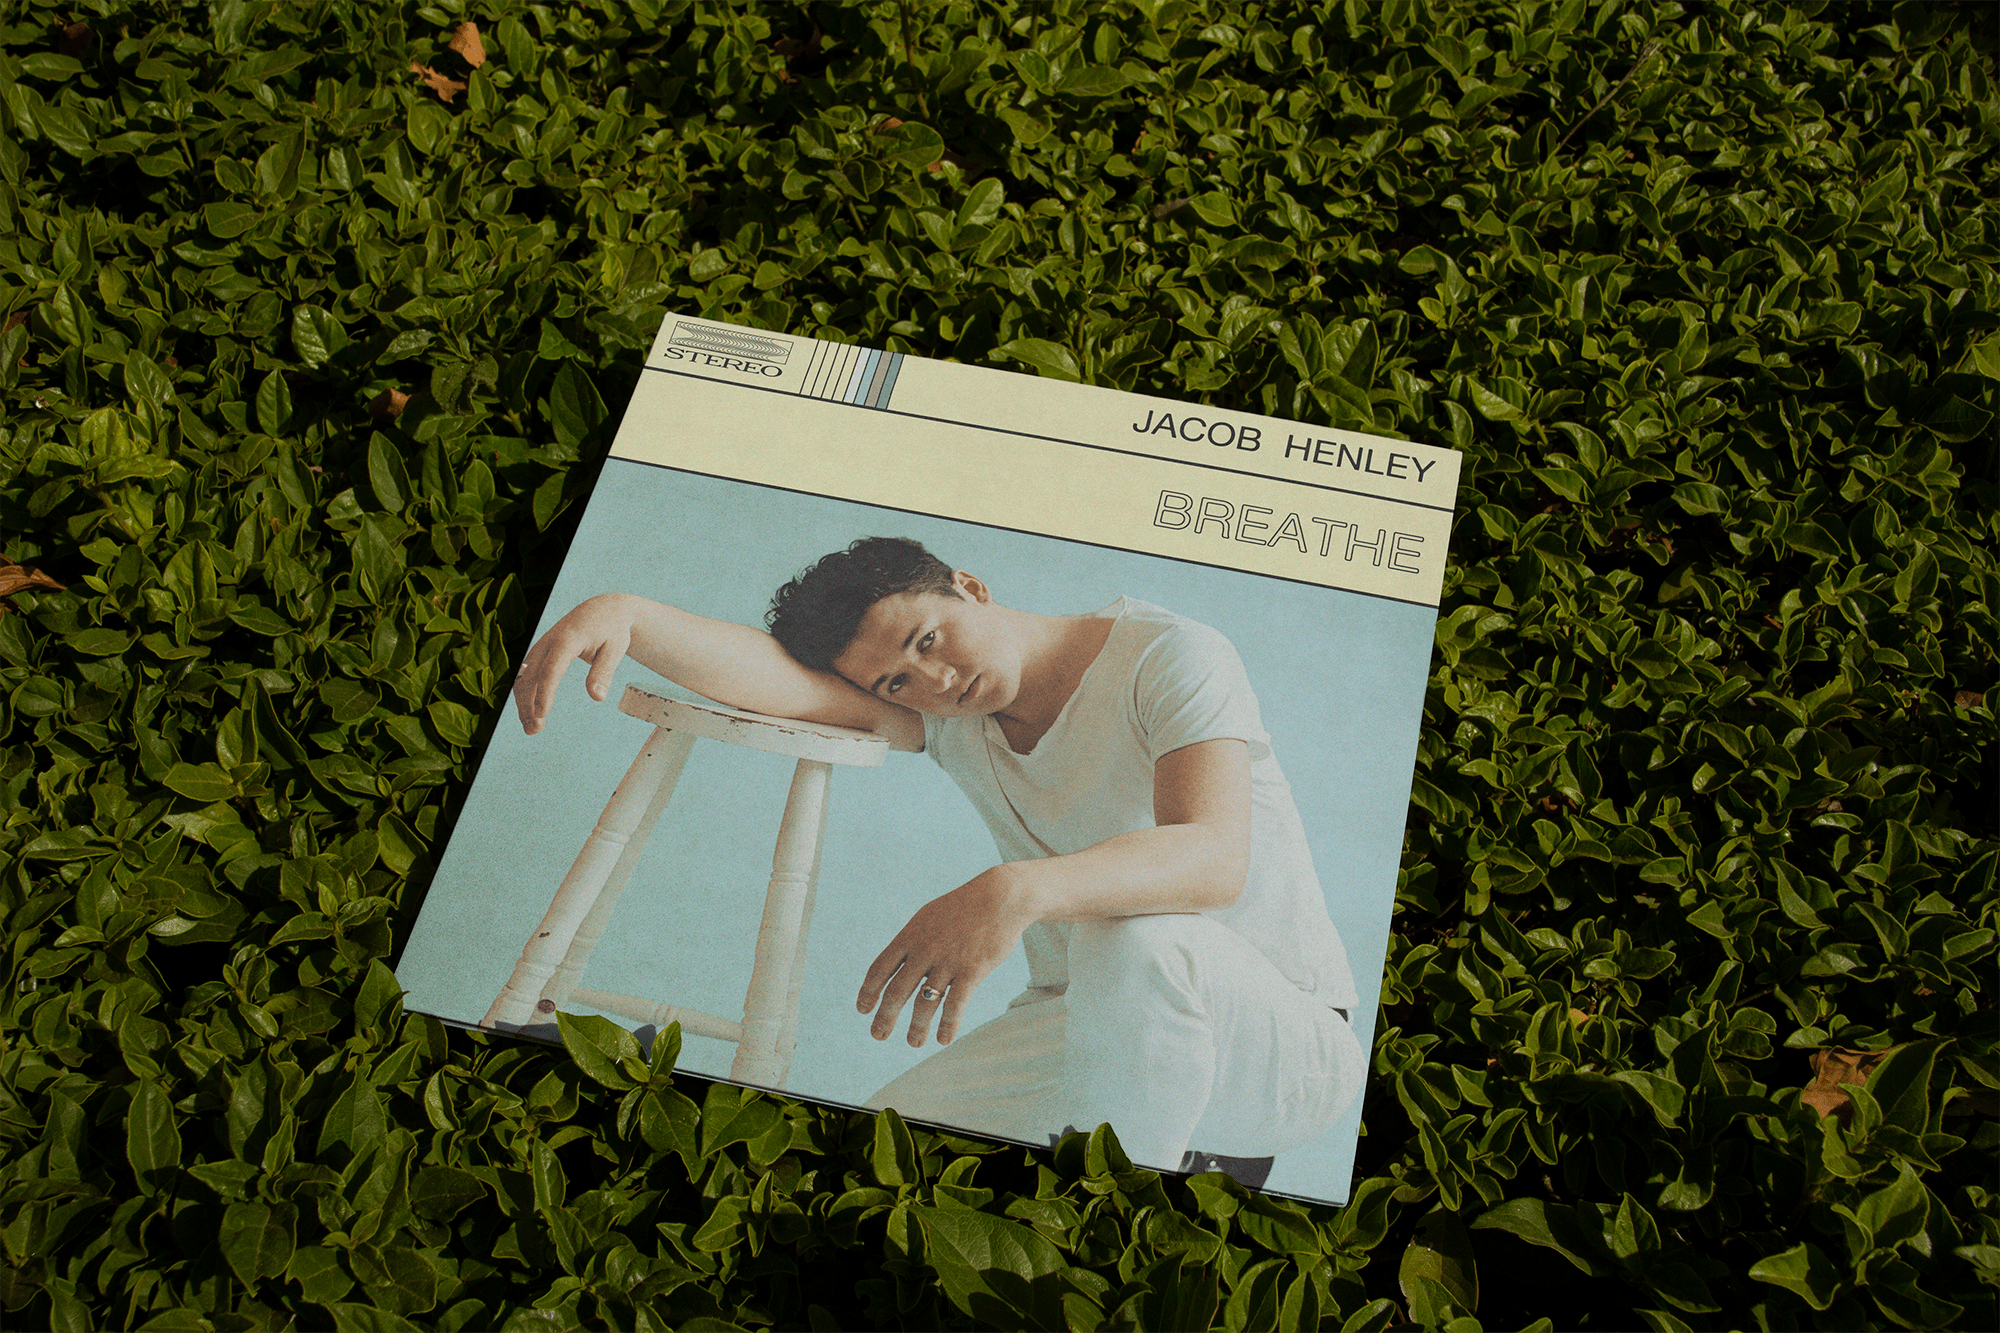 JH SINGLE COVER 1 on leaves-min.png